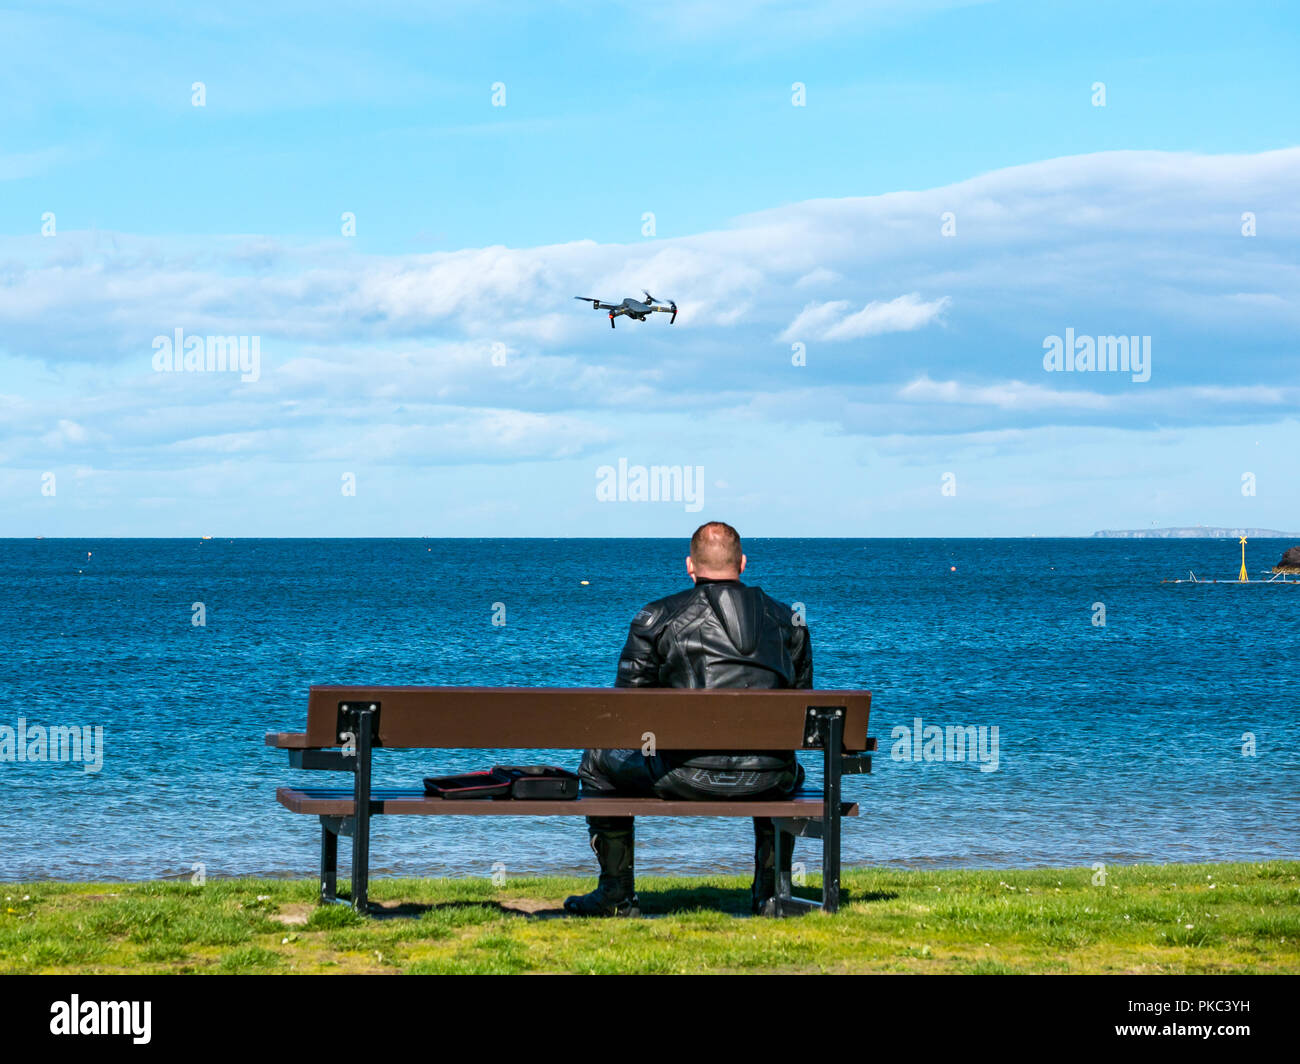 West Bay, North Berwick, East Lothian, Scotland, UK, 12th September 2018. UK Weather: A beautiful sunny but windy day on the Eastern Scottish coastline in the Firth of Forth. A man wearing motorbike leathers sits on a bench and flies a drone Stock Photo